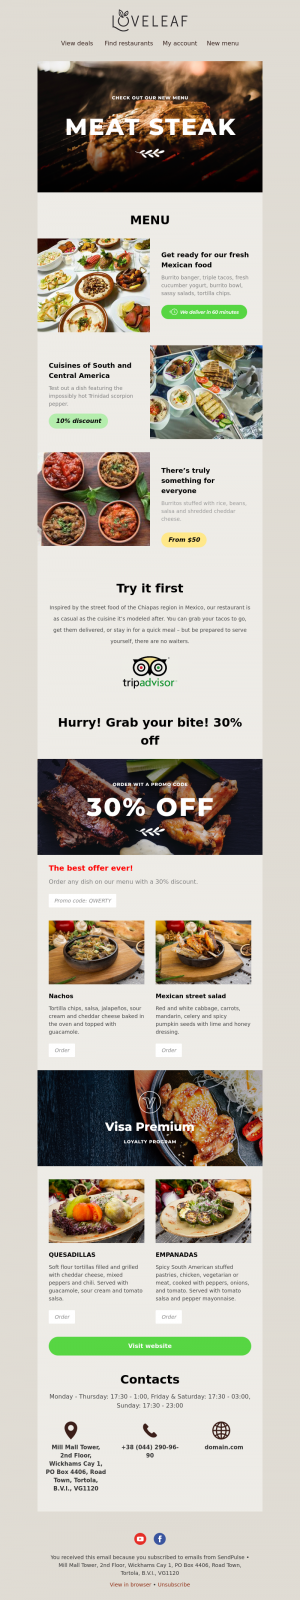 Restaurant free email template